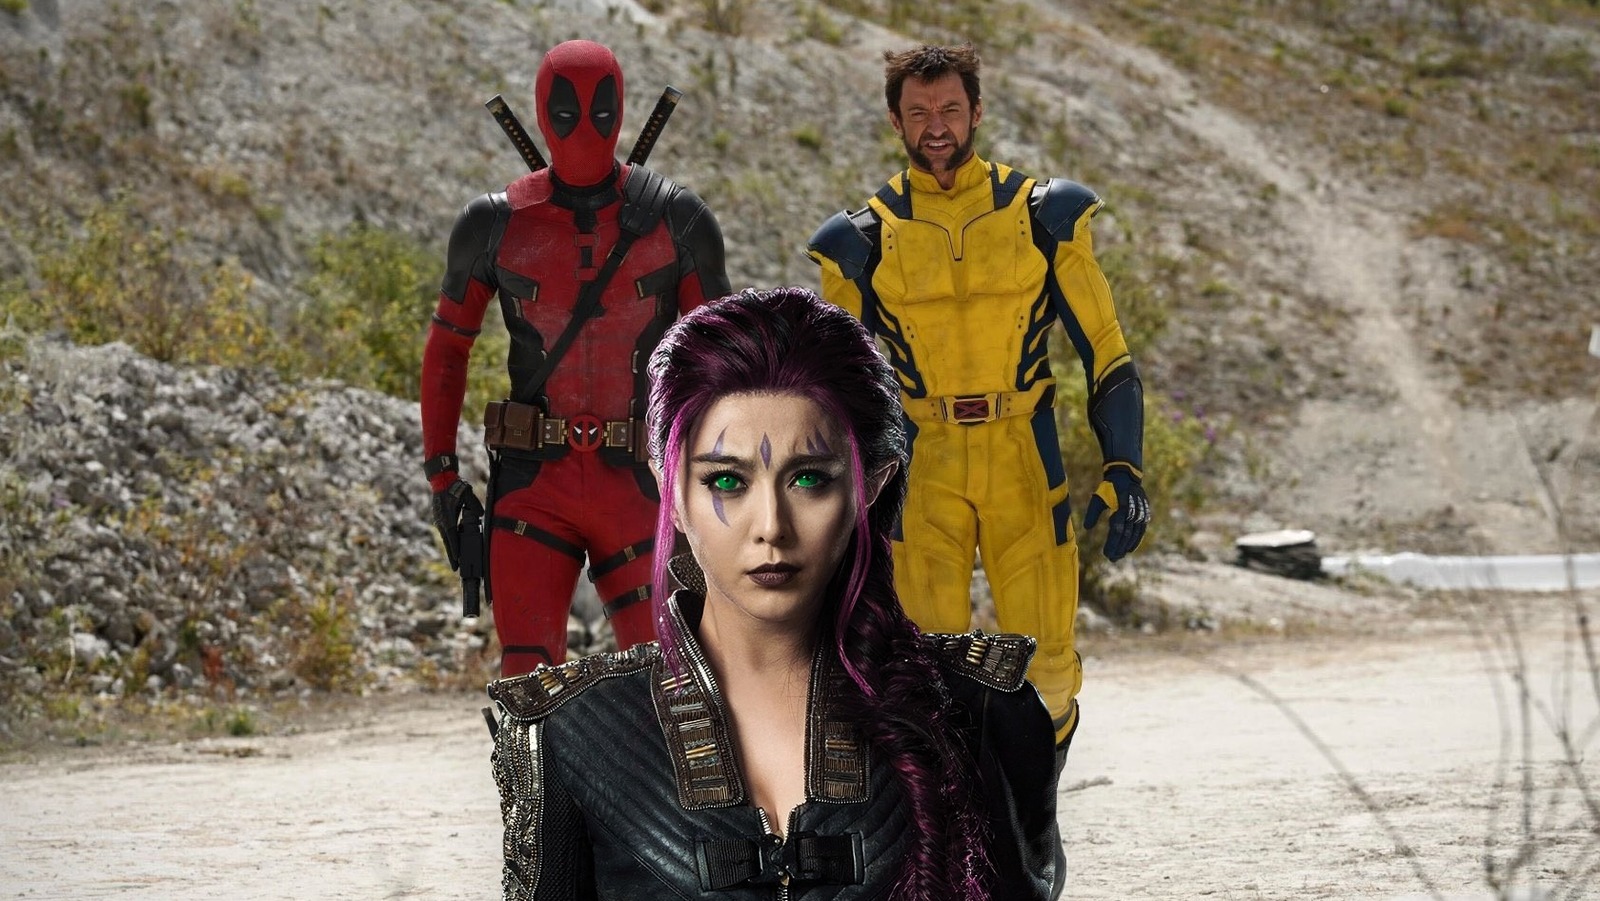 https://www.looper.com/img/gallery/did-deadpool-3-just-tease-another-mcu-x-men-debut-and-a-possible-plot-reveal/l-intro-1689087325.jpg